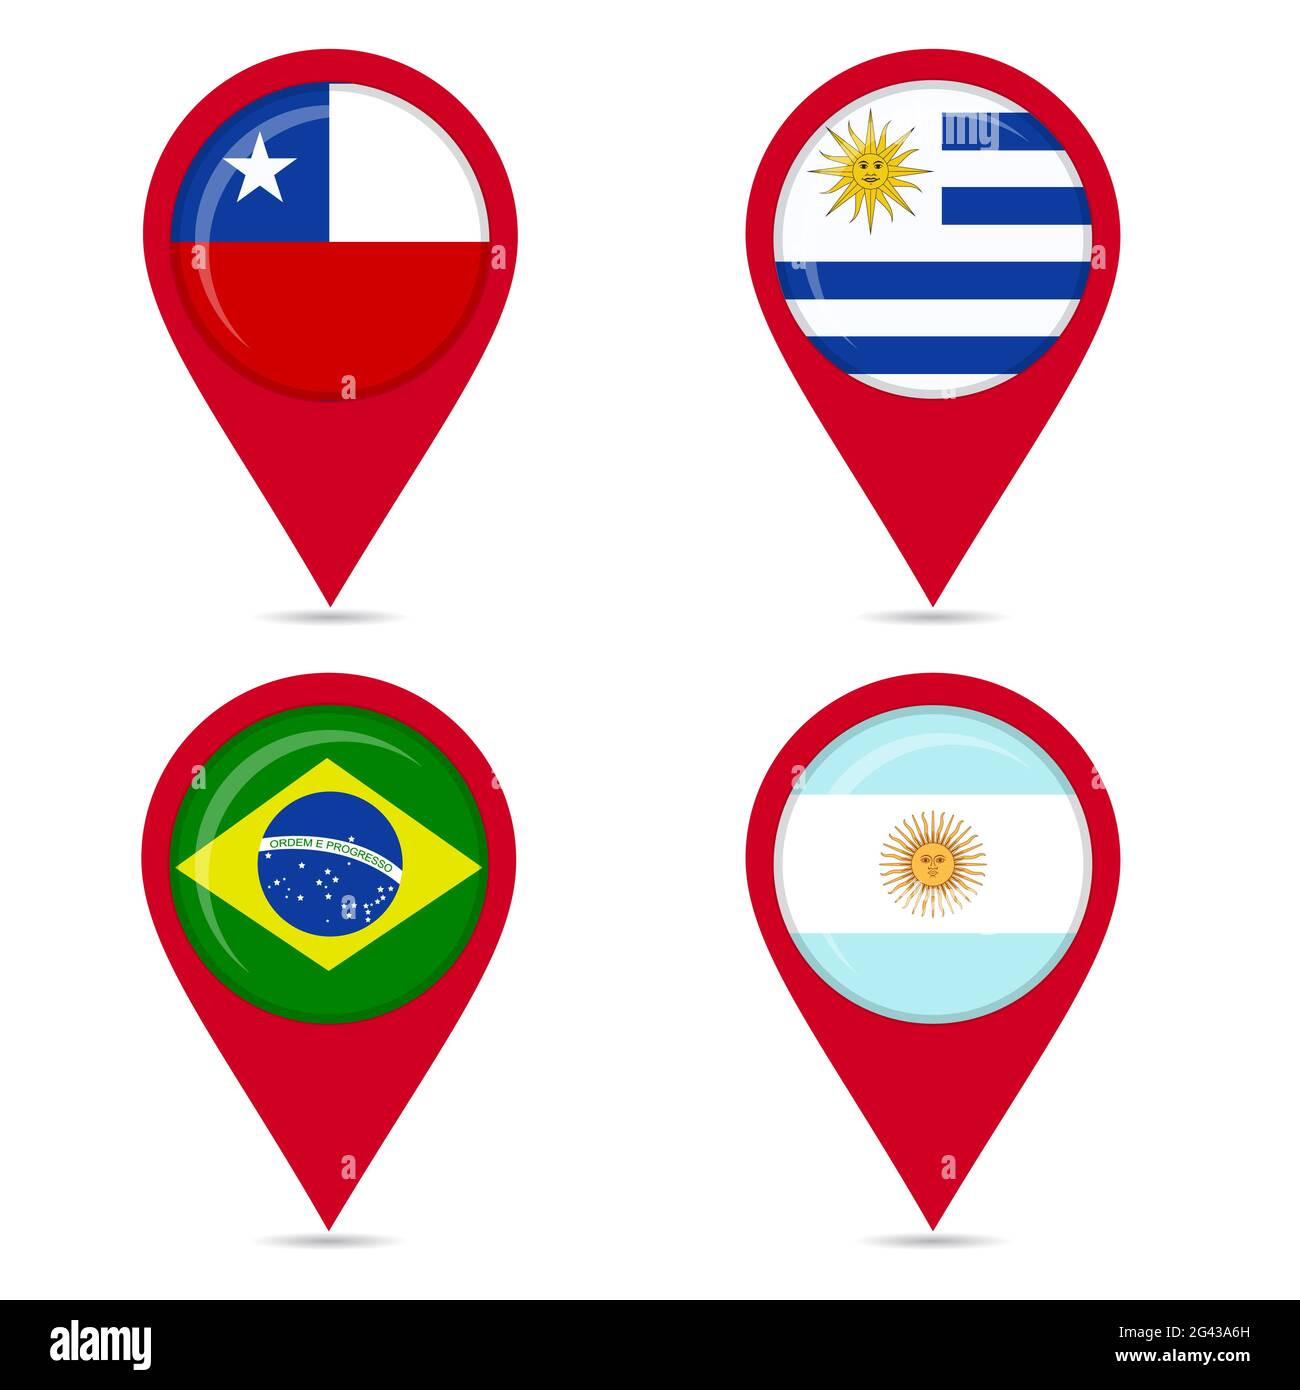 Map pin icons of national flags: Uruguay, Chile, Brazil, Argentine. White background. Stock Vector